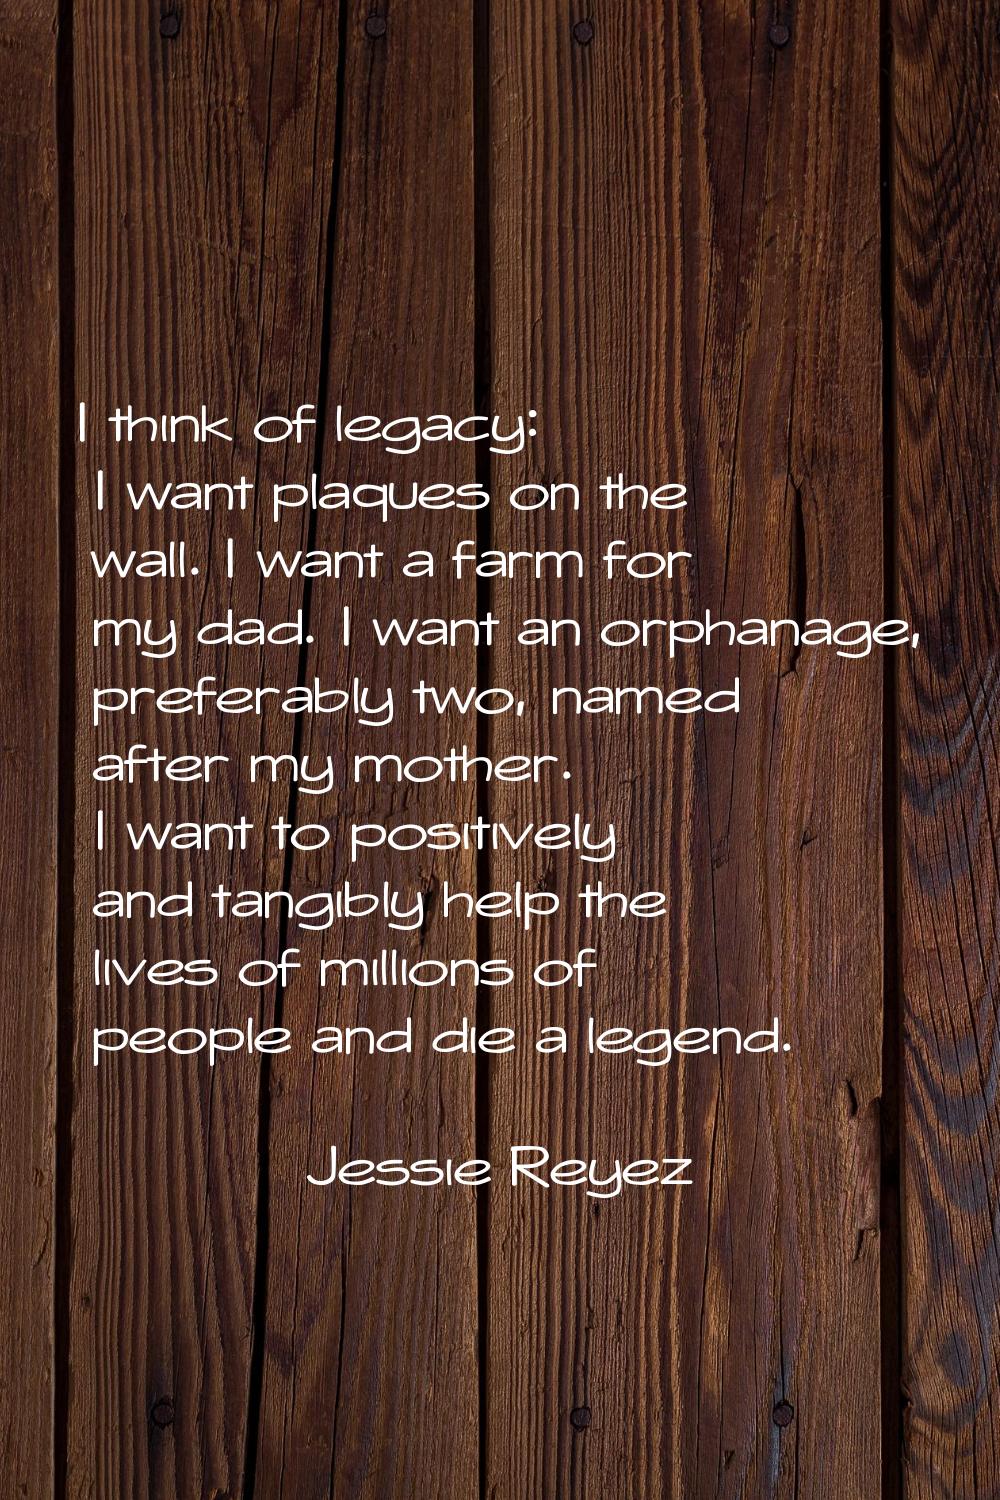 I think of legacy: I want plaques on the wall. I want a farm for my dad. I want an orphanage, prefe